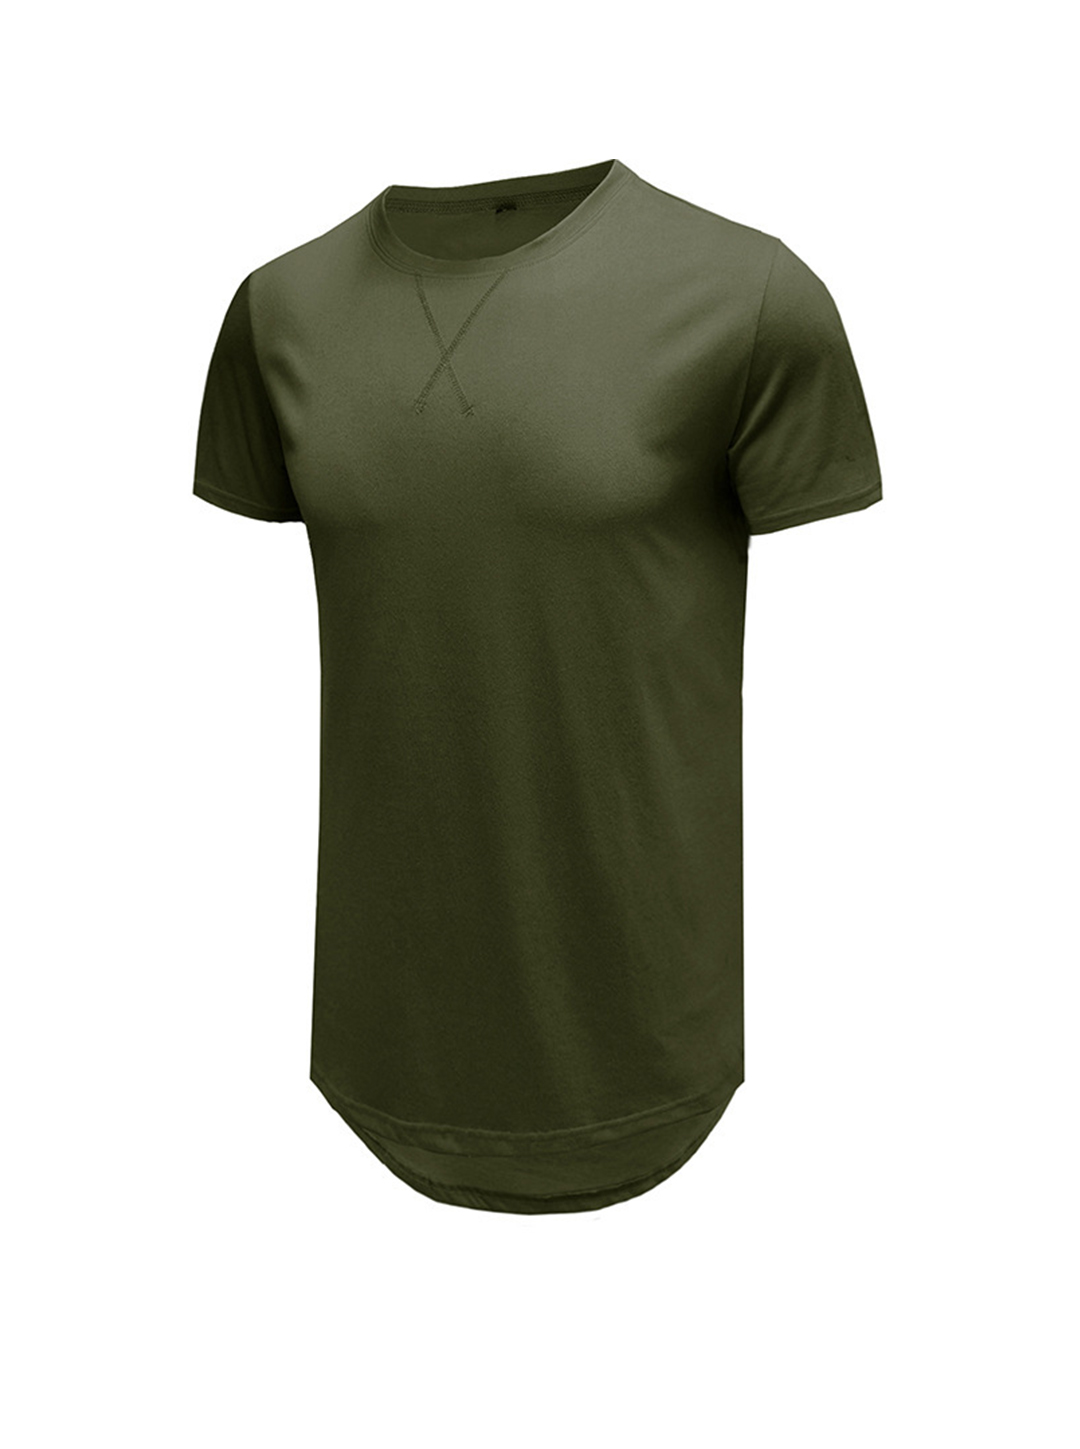 Men's Justin Solid Color Crew Neck Casual T-shirt-poisonstreetwear.com